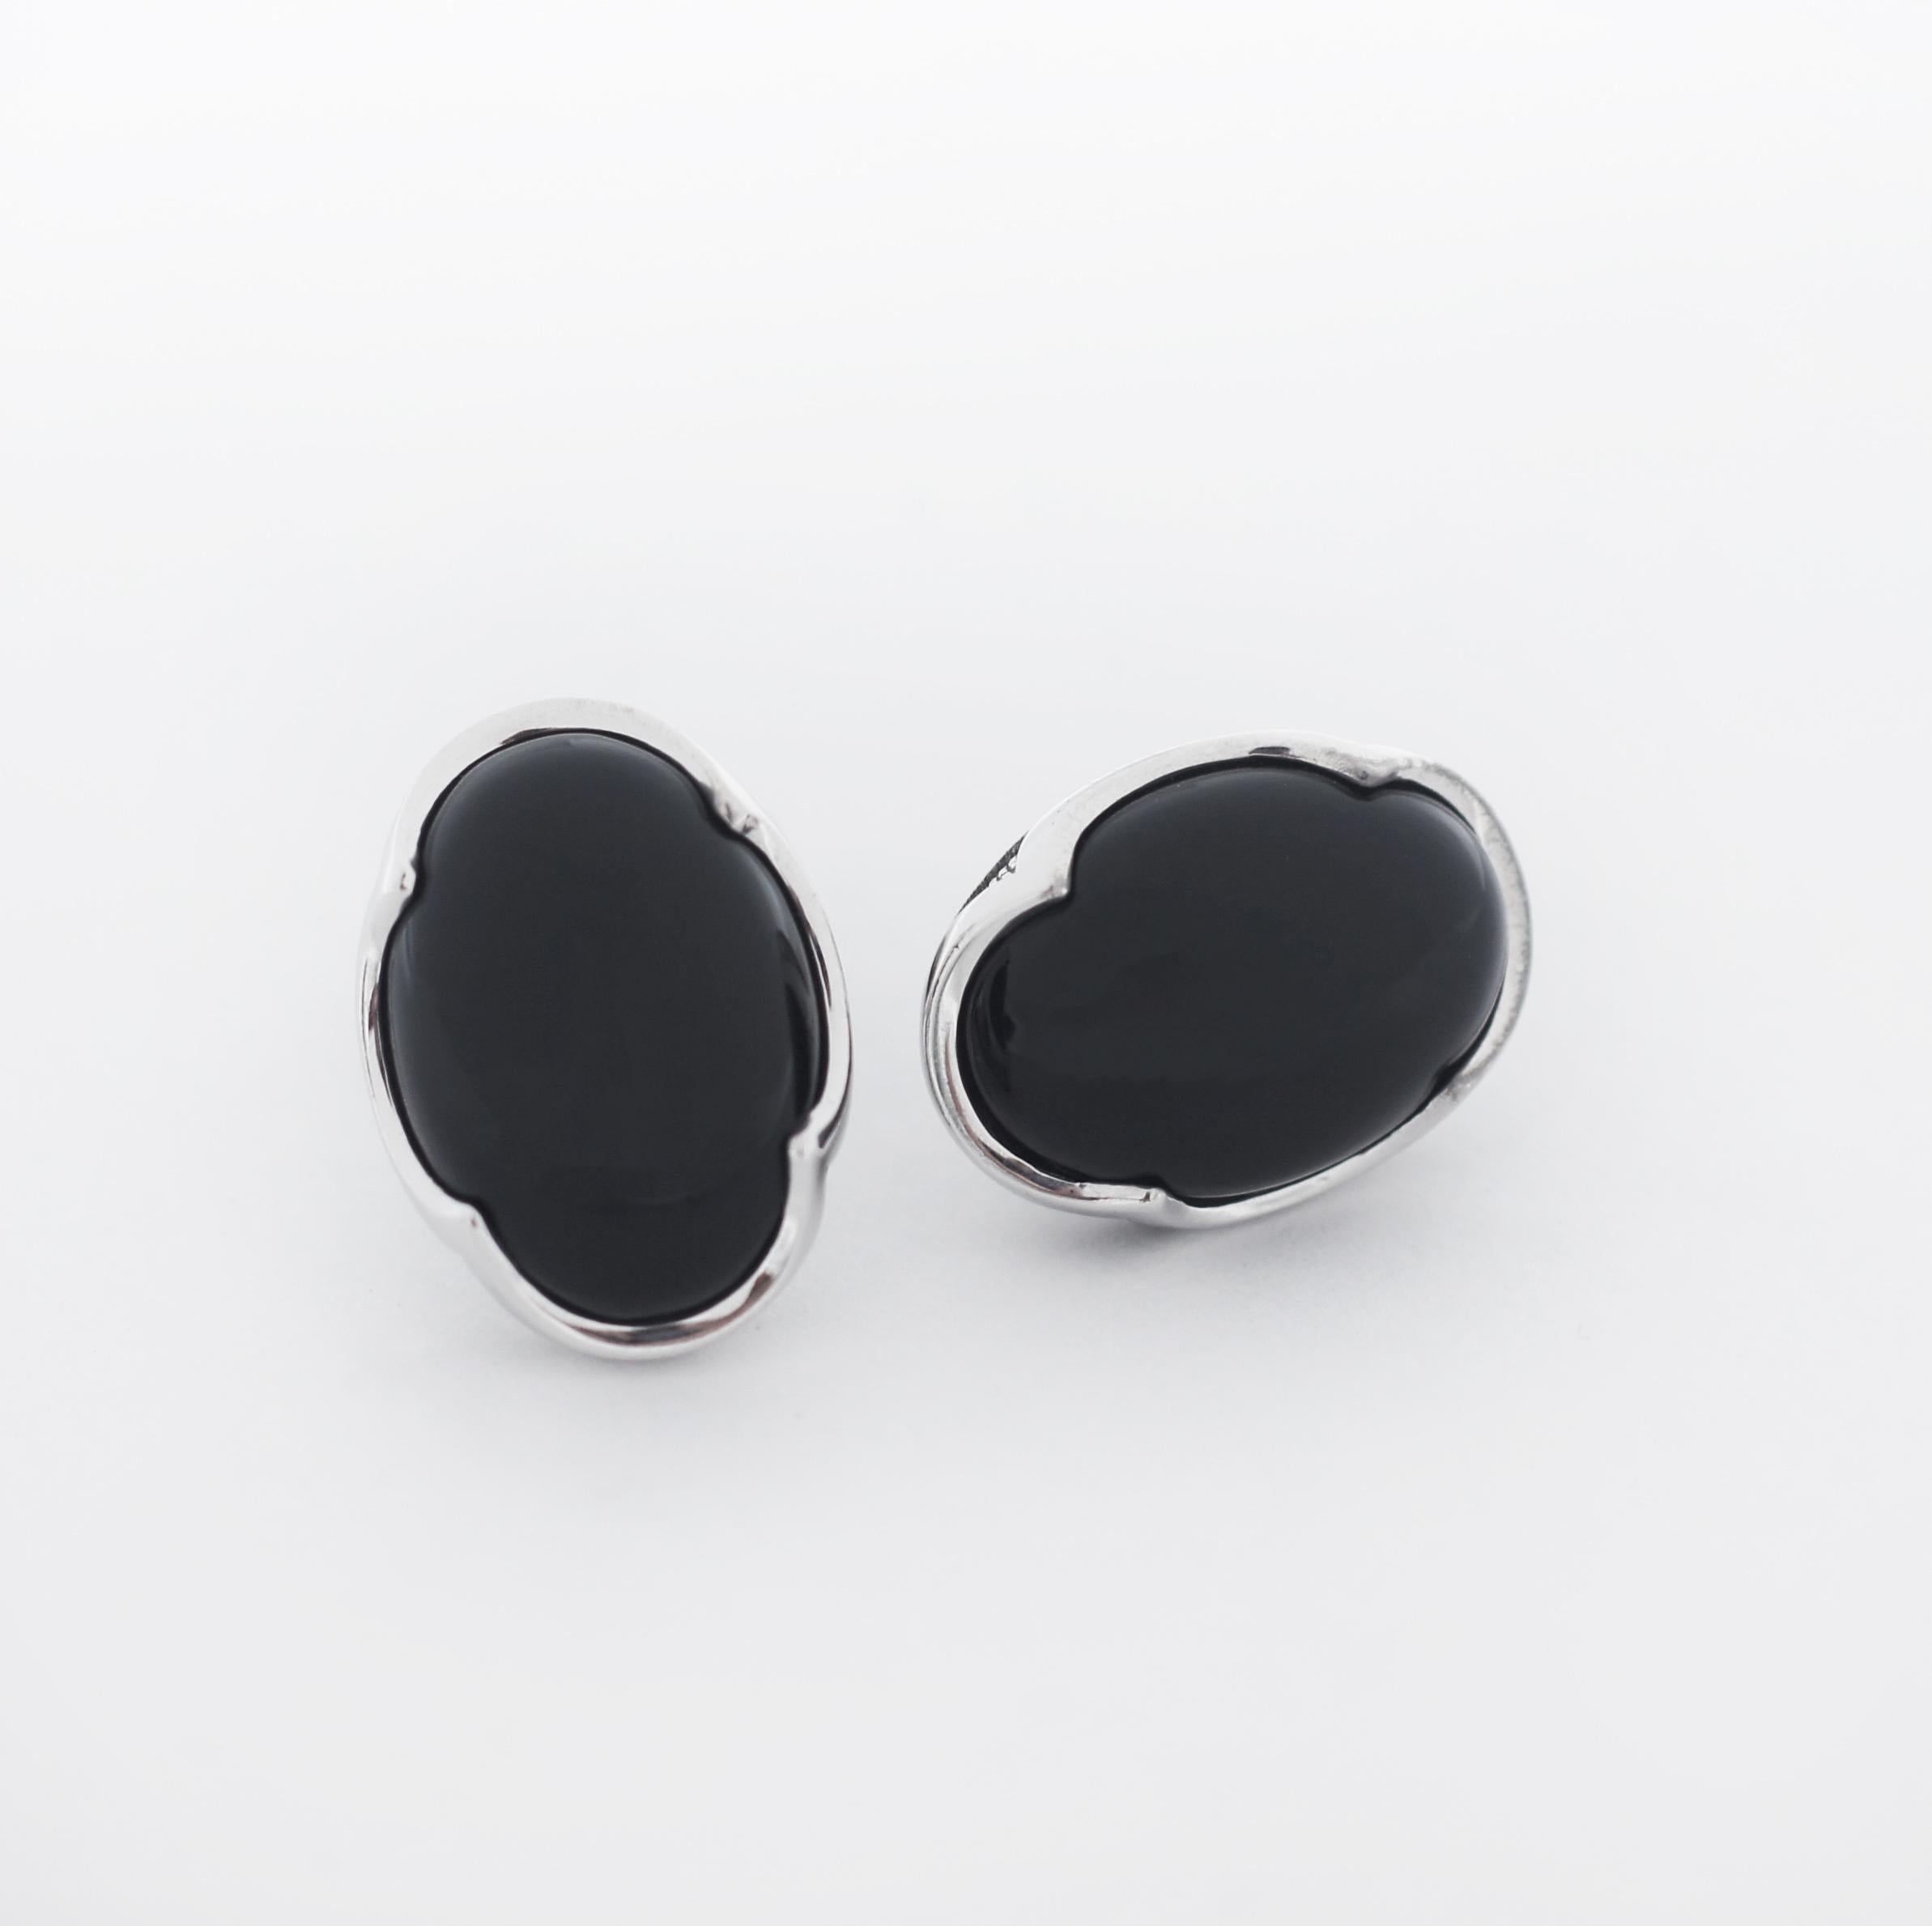 TACORI
Retro Classic
Oval Cabochon Cuff Links featuring Black Onyx
STYLE MCL10319
Oval Black Onyx gemstone cuff links cradled in a silver signature Tacori crescent cut.
This piece adds a sophisticated finish to your shirt cuffs and an unexpected pop